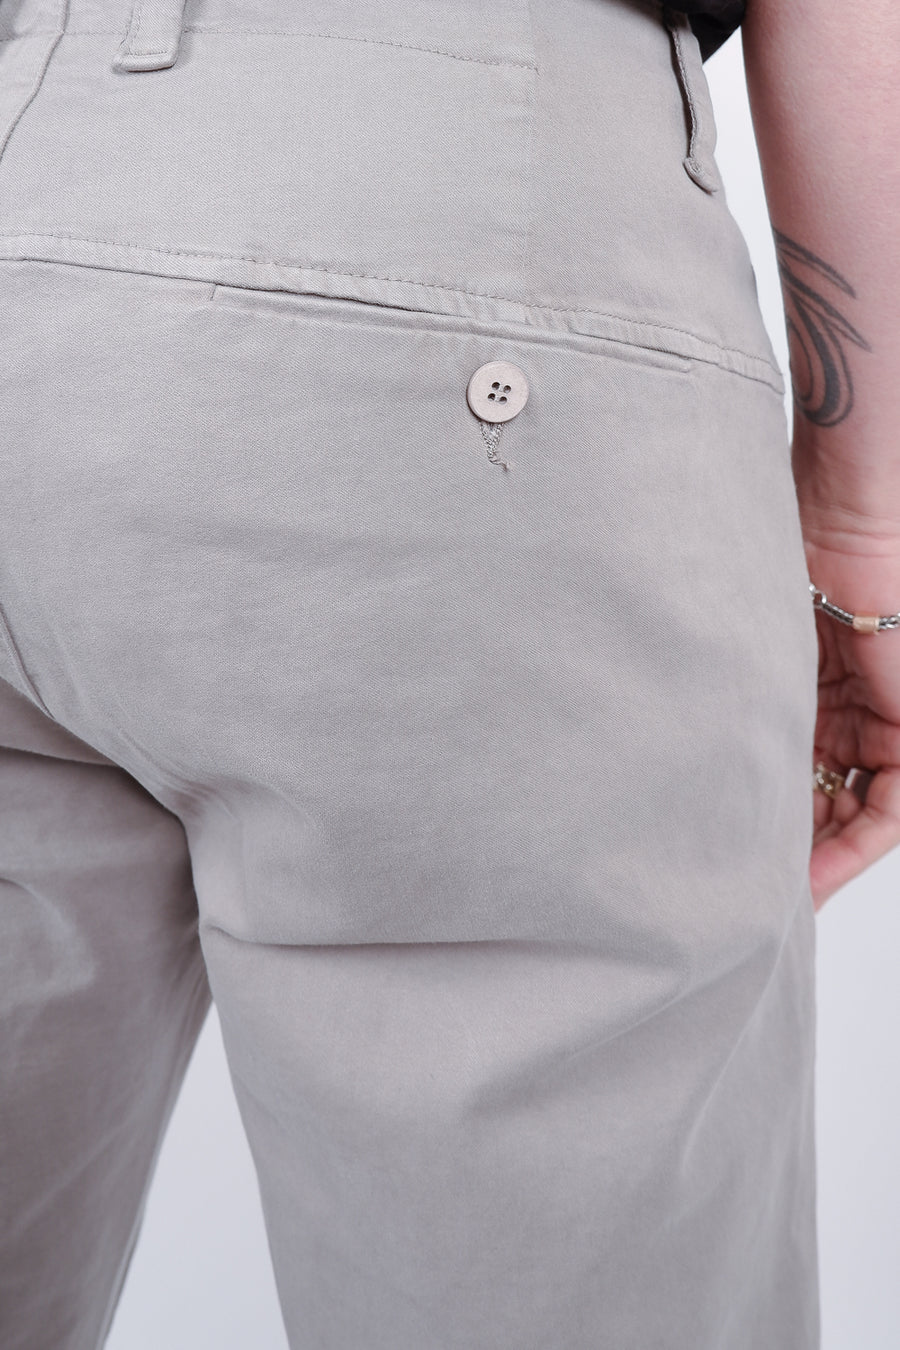 Buy the Transit Cotton Stretch Regular Fit Chinos in Taupe at Intro. Spend £50 for free UK delivery. Official stockists. We ship worldwide.